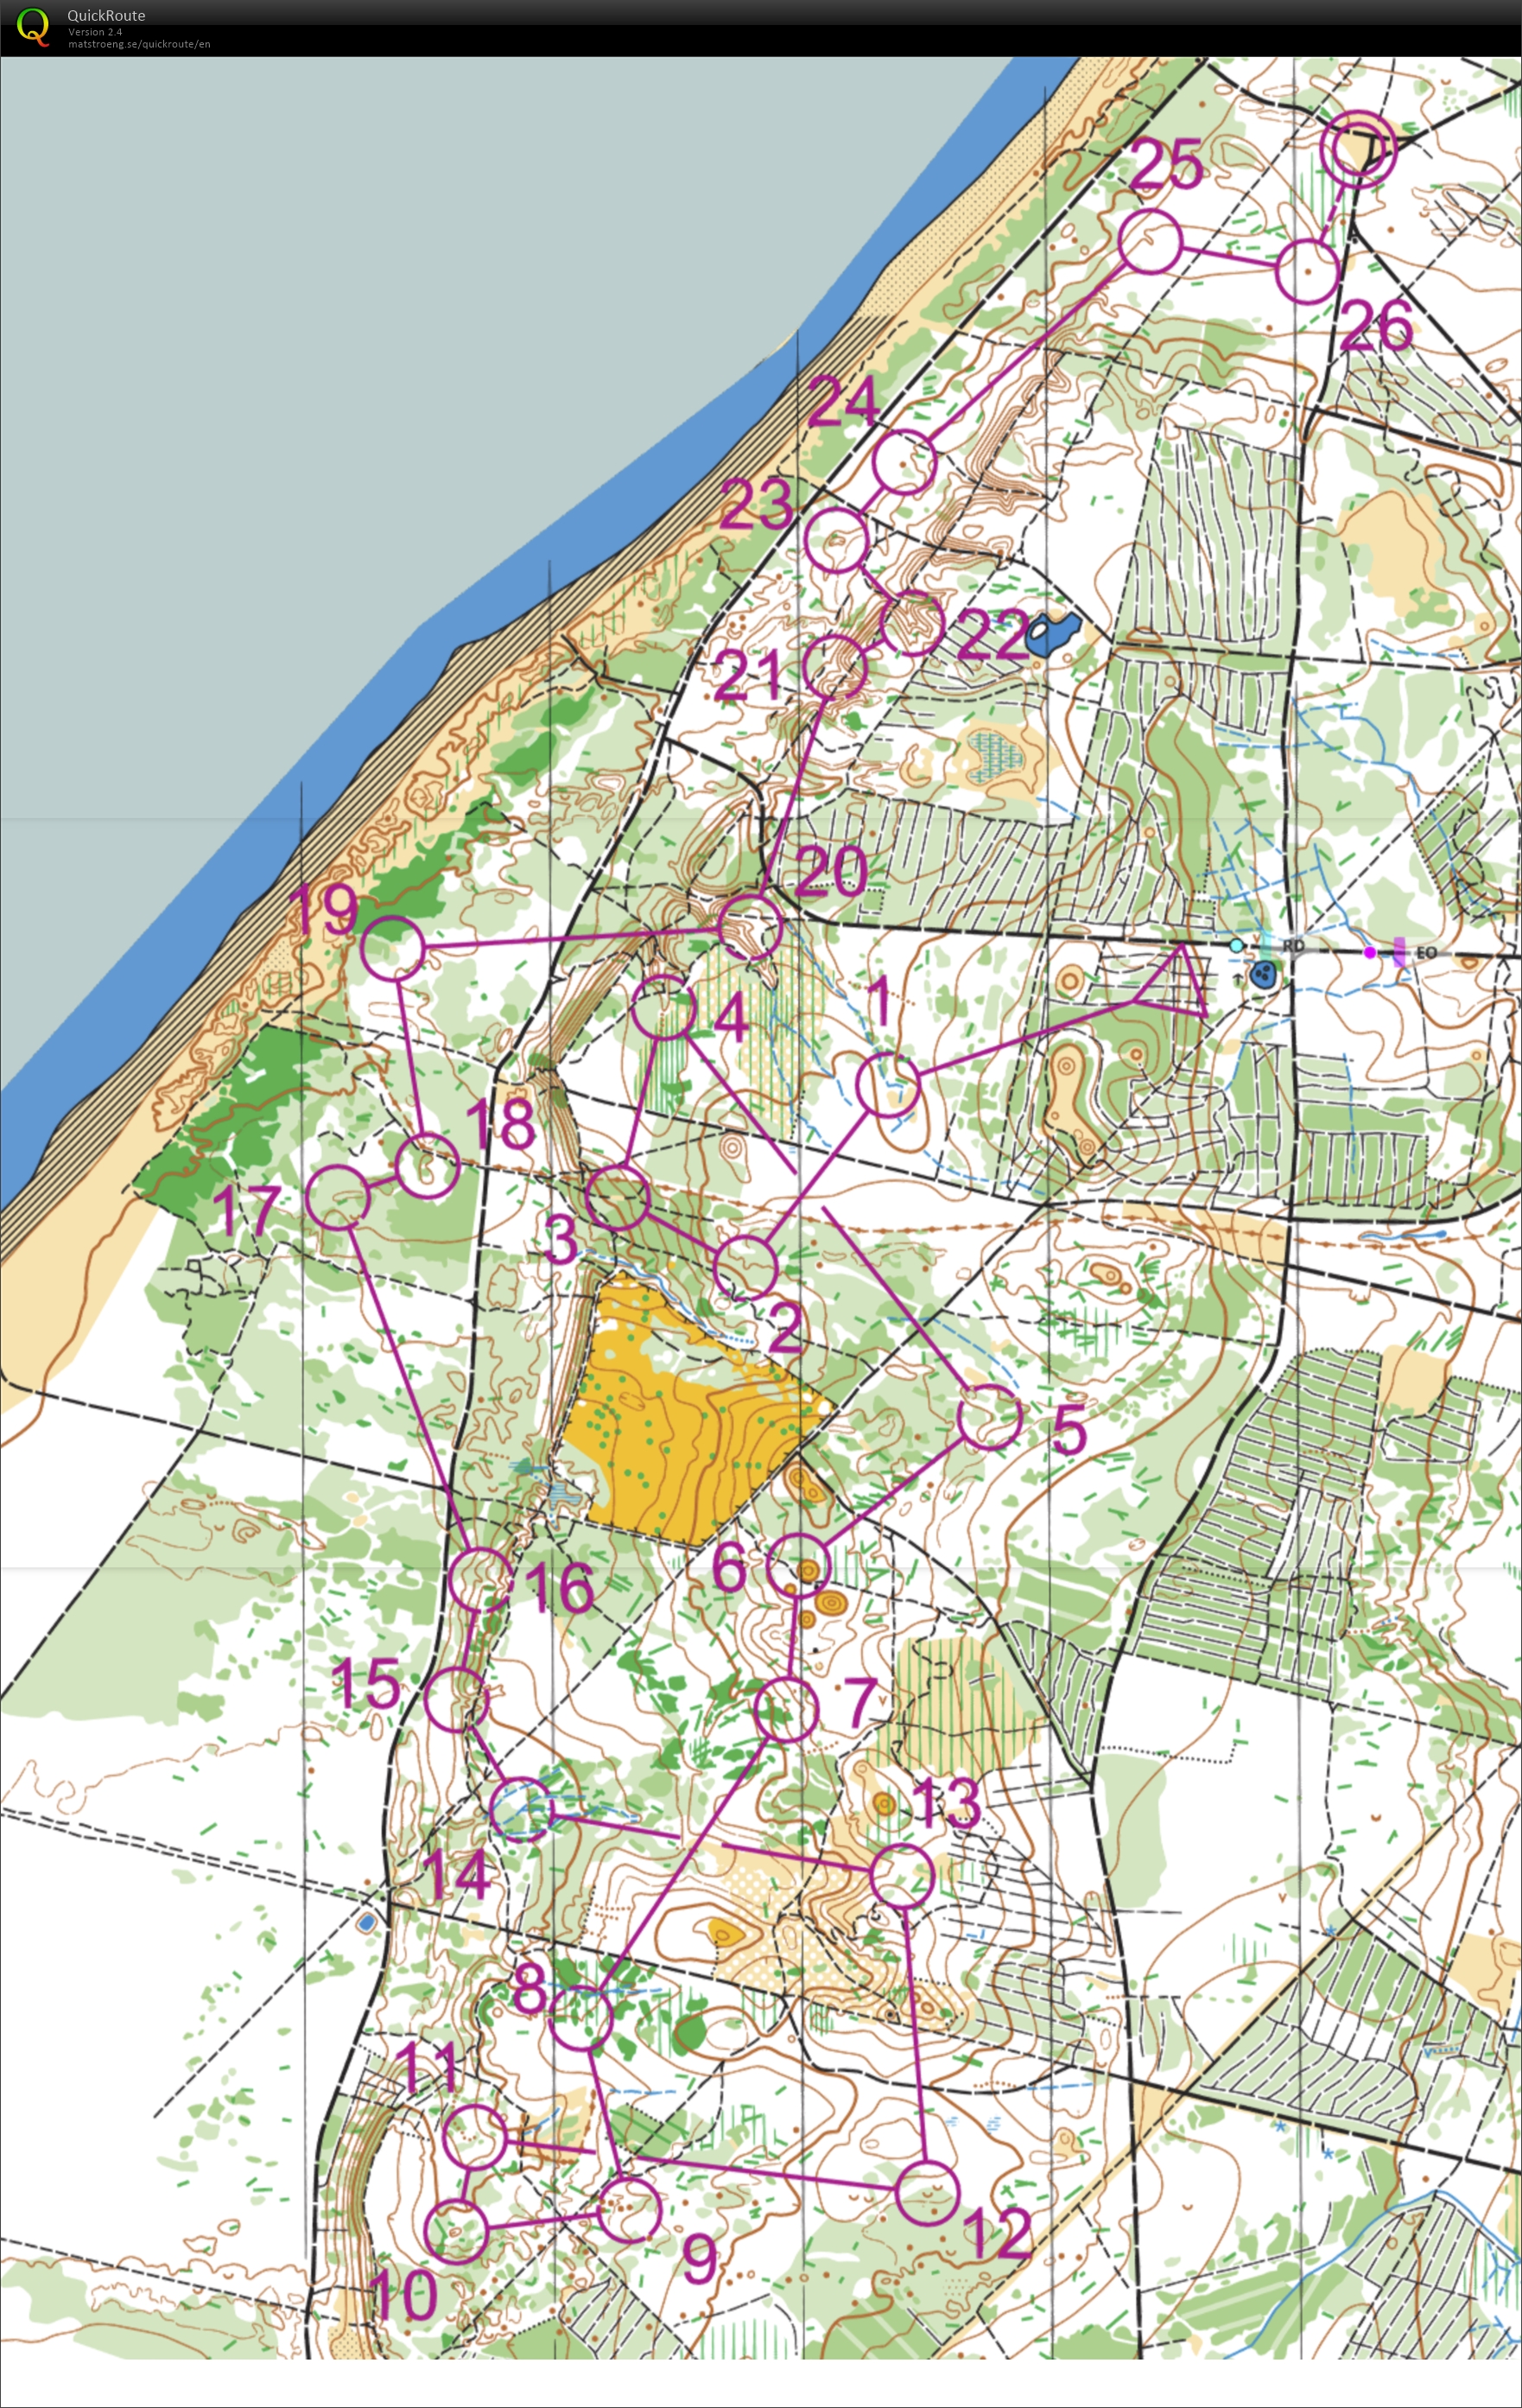 Danish spring middle WRE (2019-03-30)